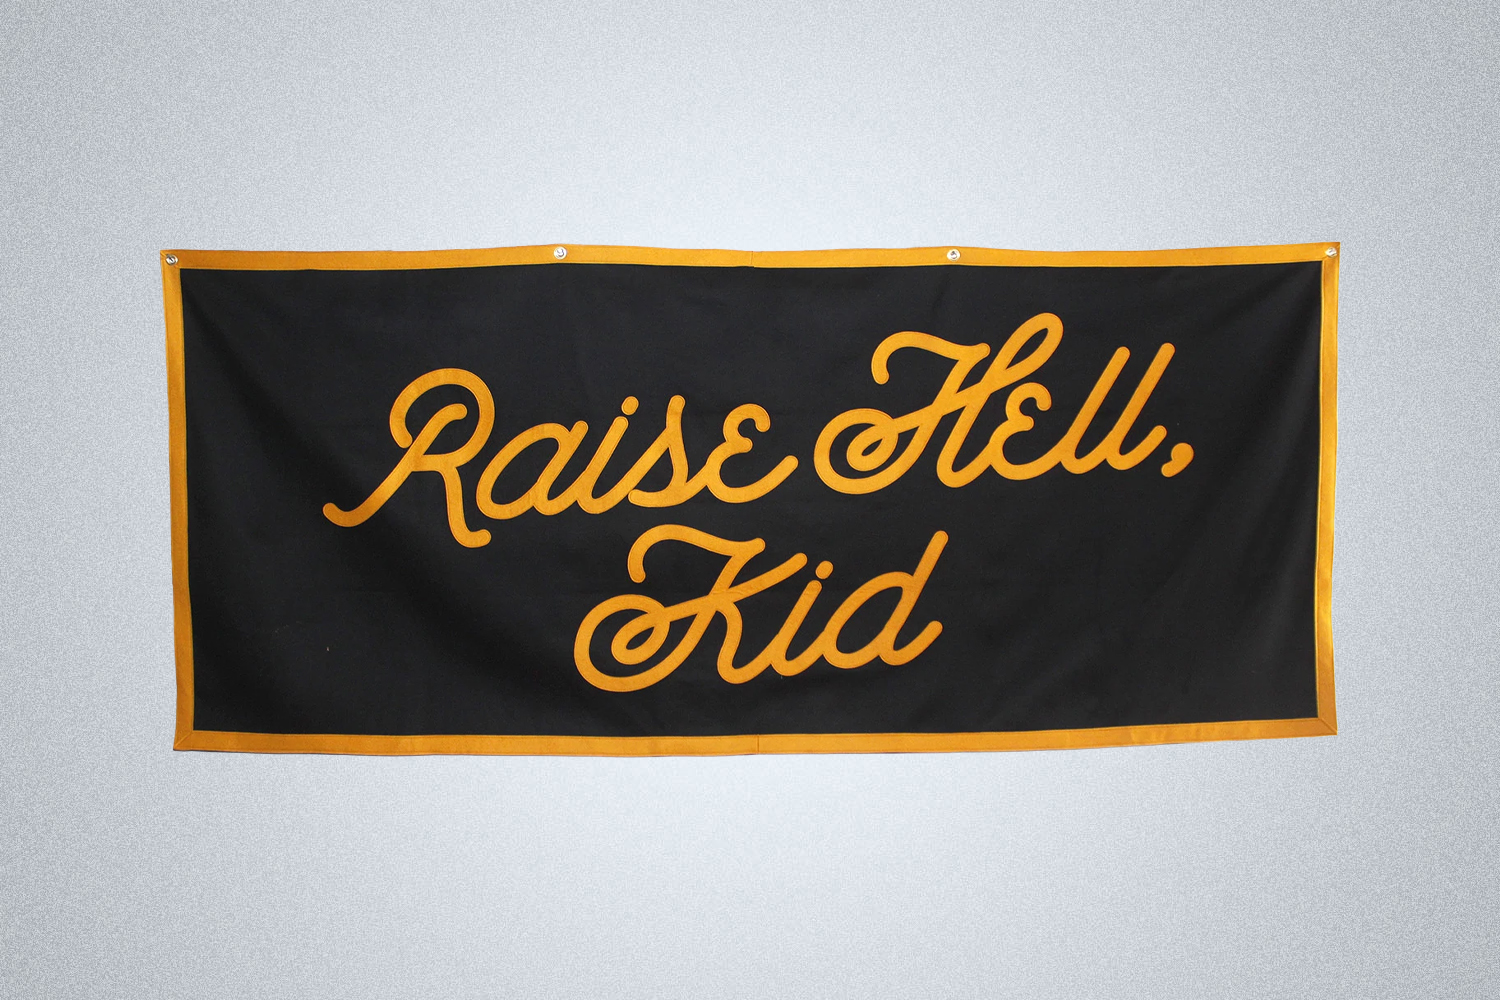 The Raise Hell, Kid Championship Banner is the best luxury grad gift to buy in 2022